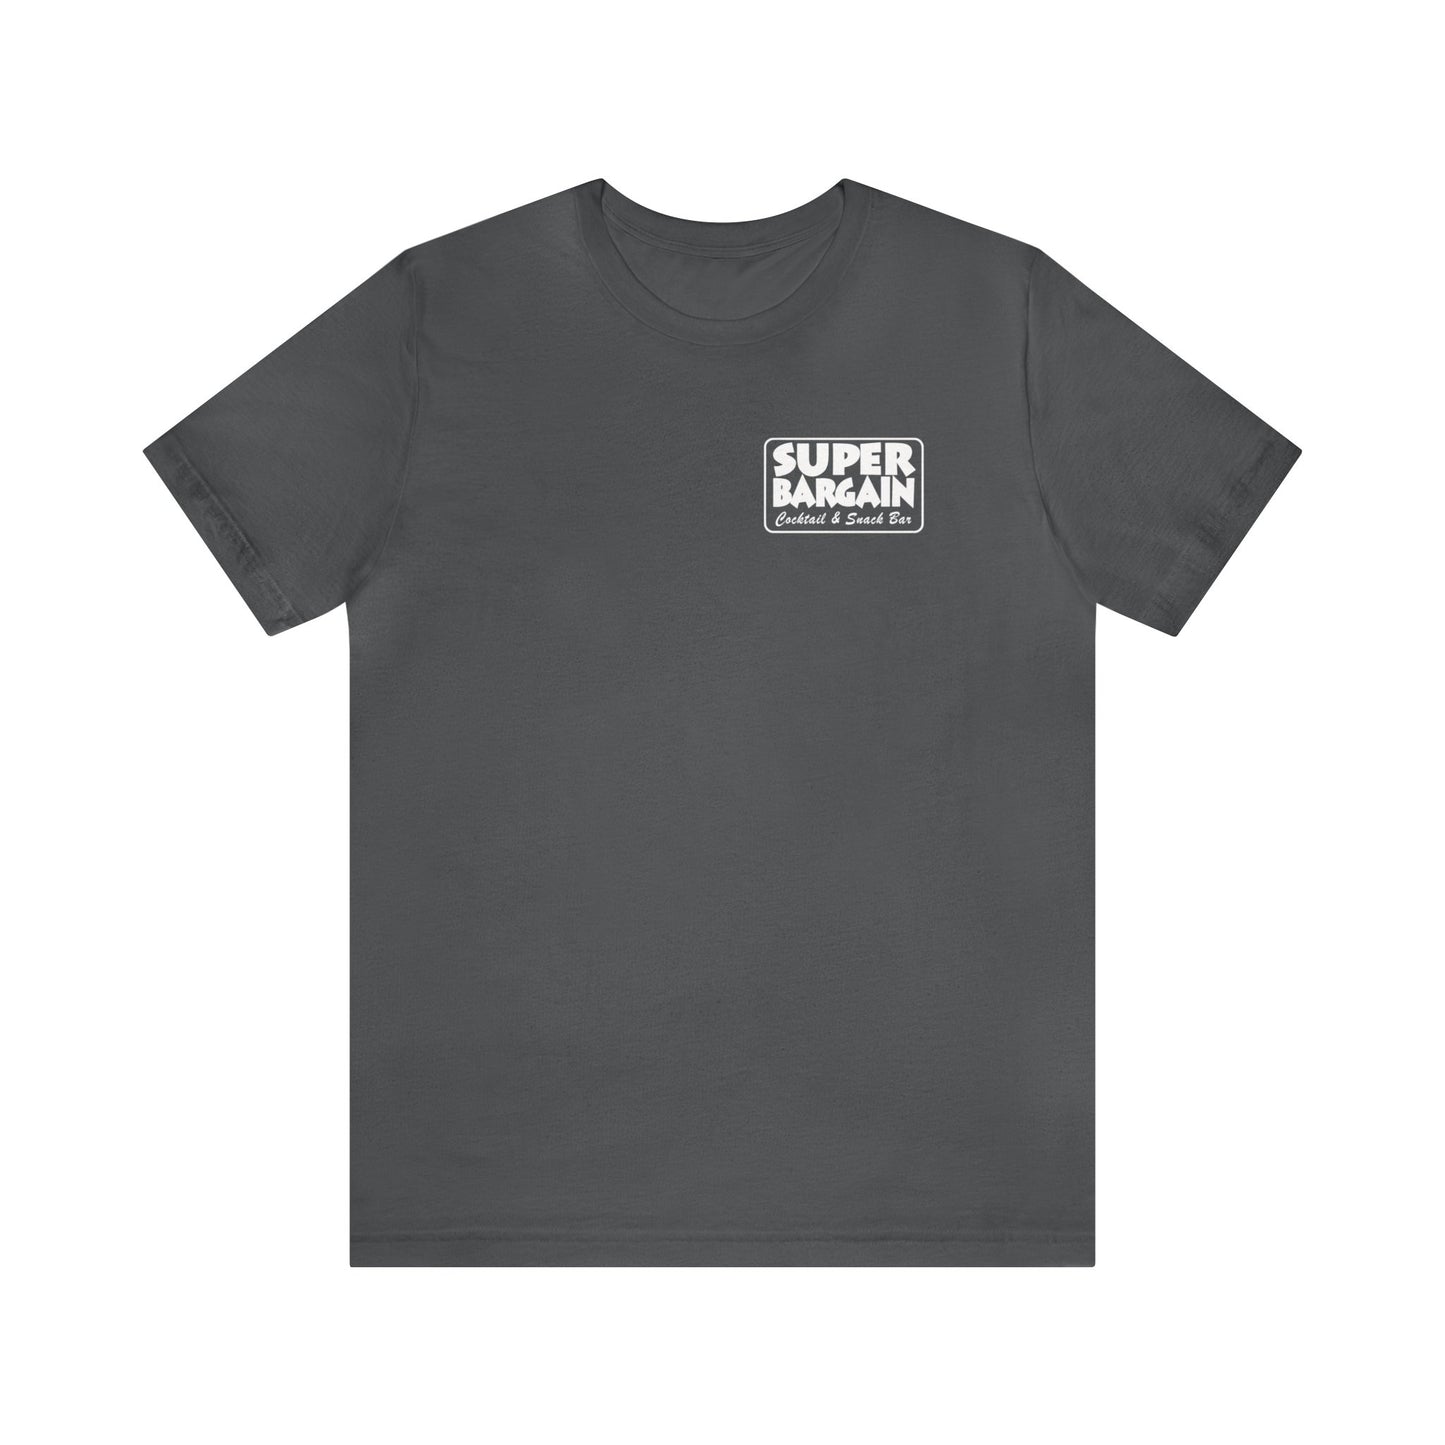 A Printify Unisex Jersey Short Sleeve Monochrome Logo Tee with a small logo on the left chest area that reads "Toronto Super Bargain" in white text enclosed in a dark rectangle.